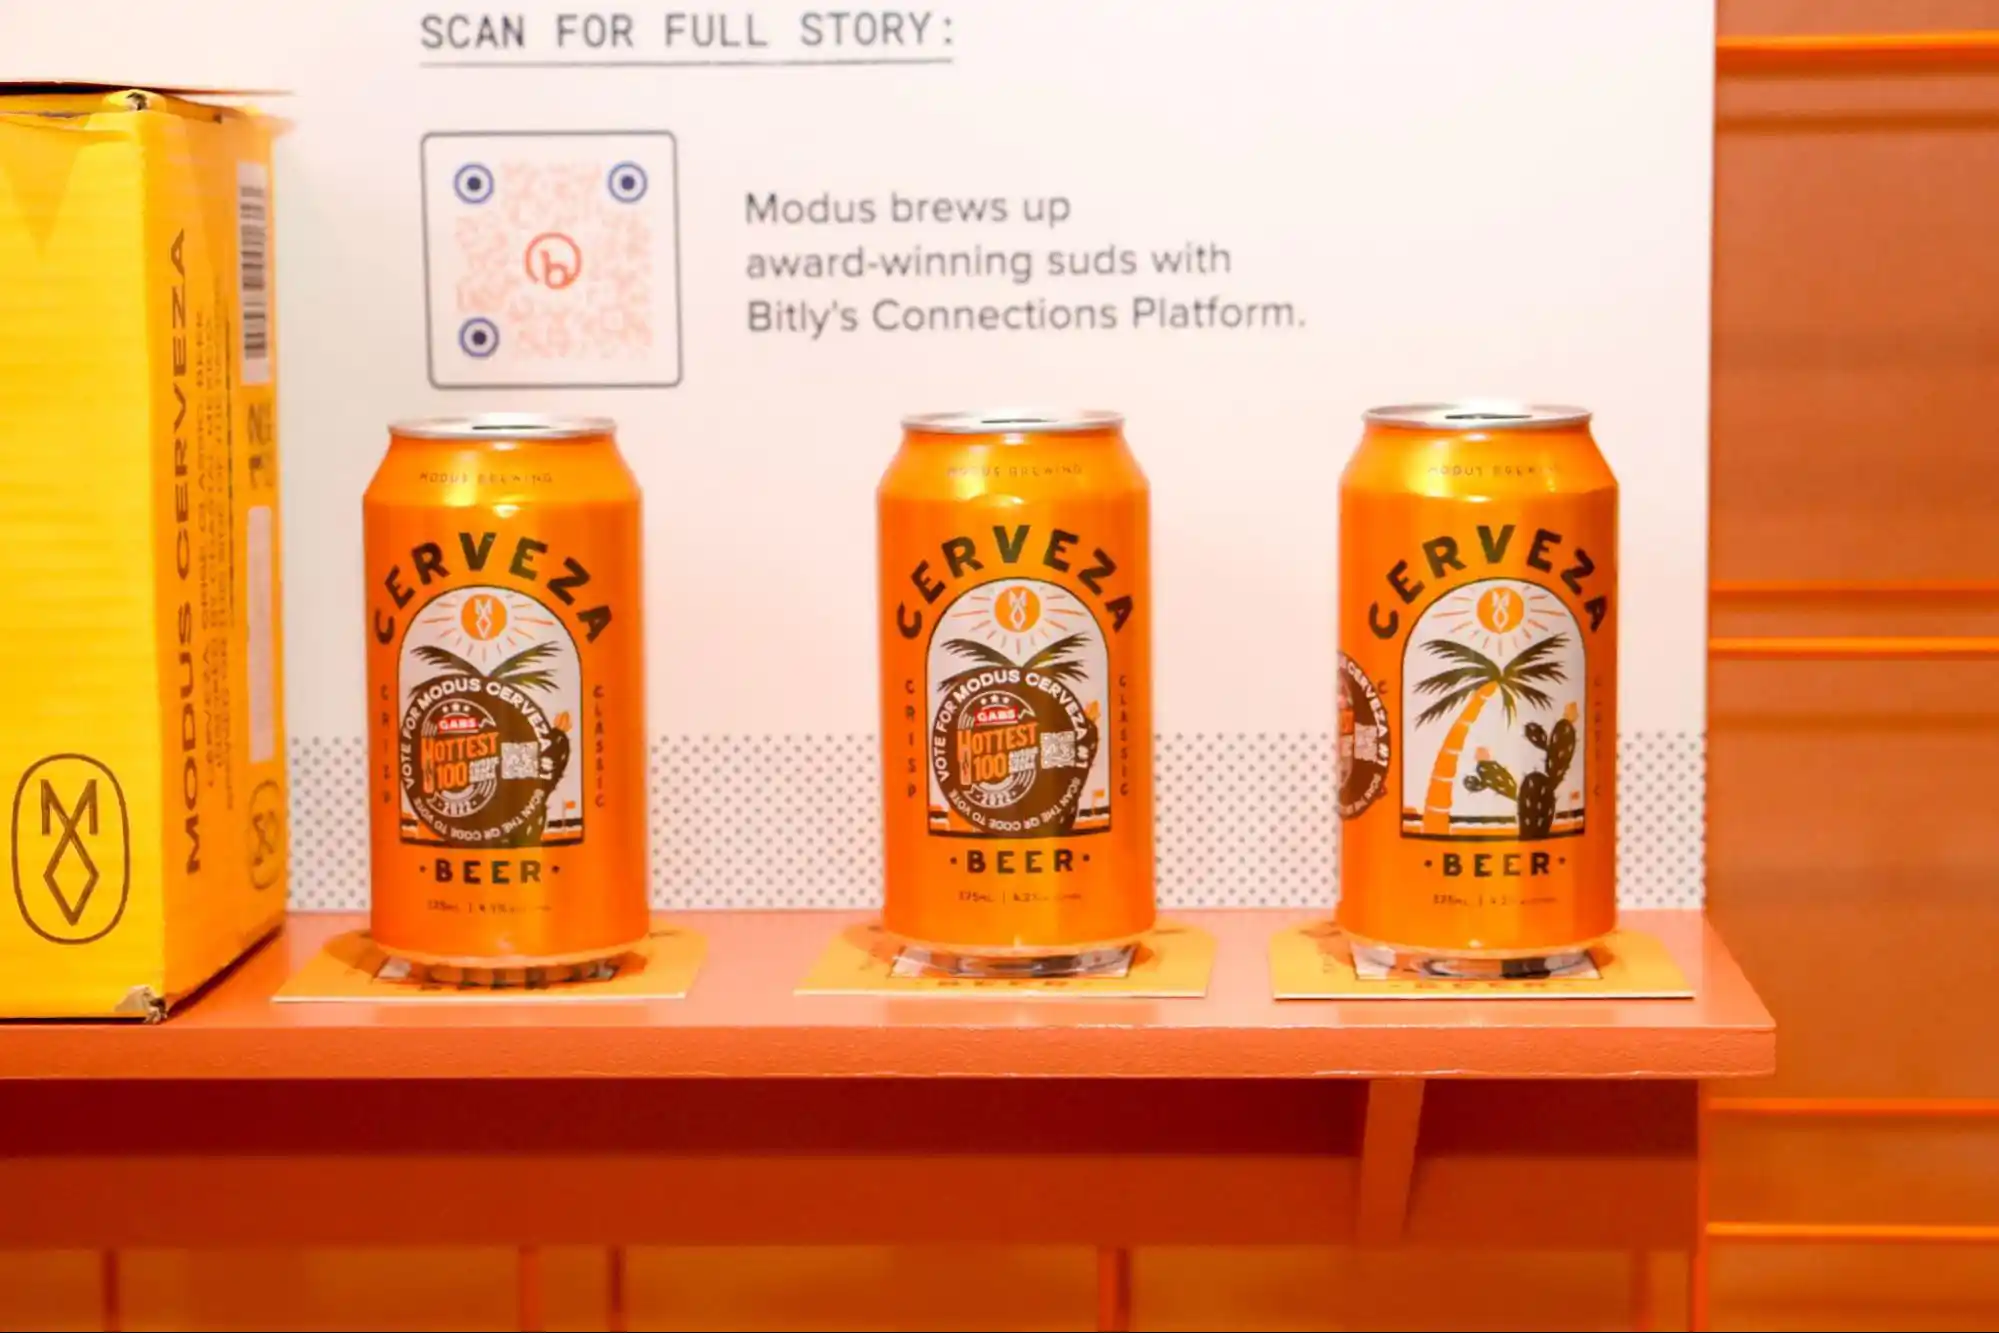 Display of Modus Brewring's beers at Bitly's booth at Advertising Week 2023 featuring a QR Code